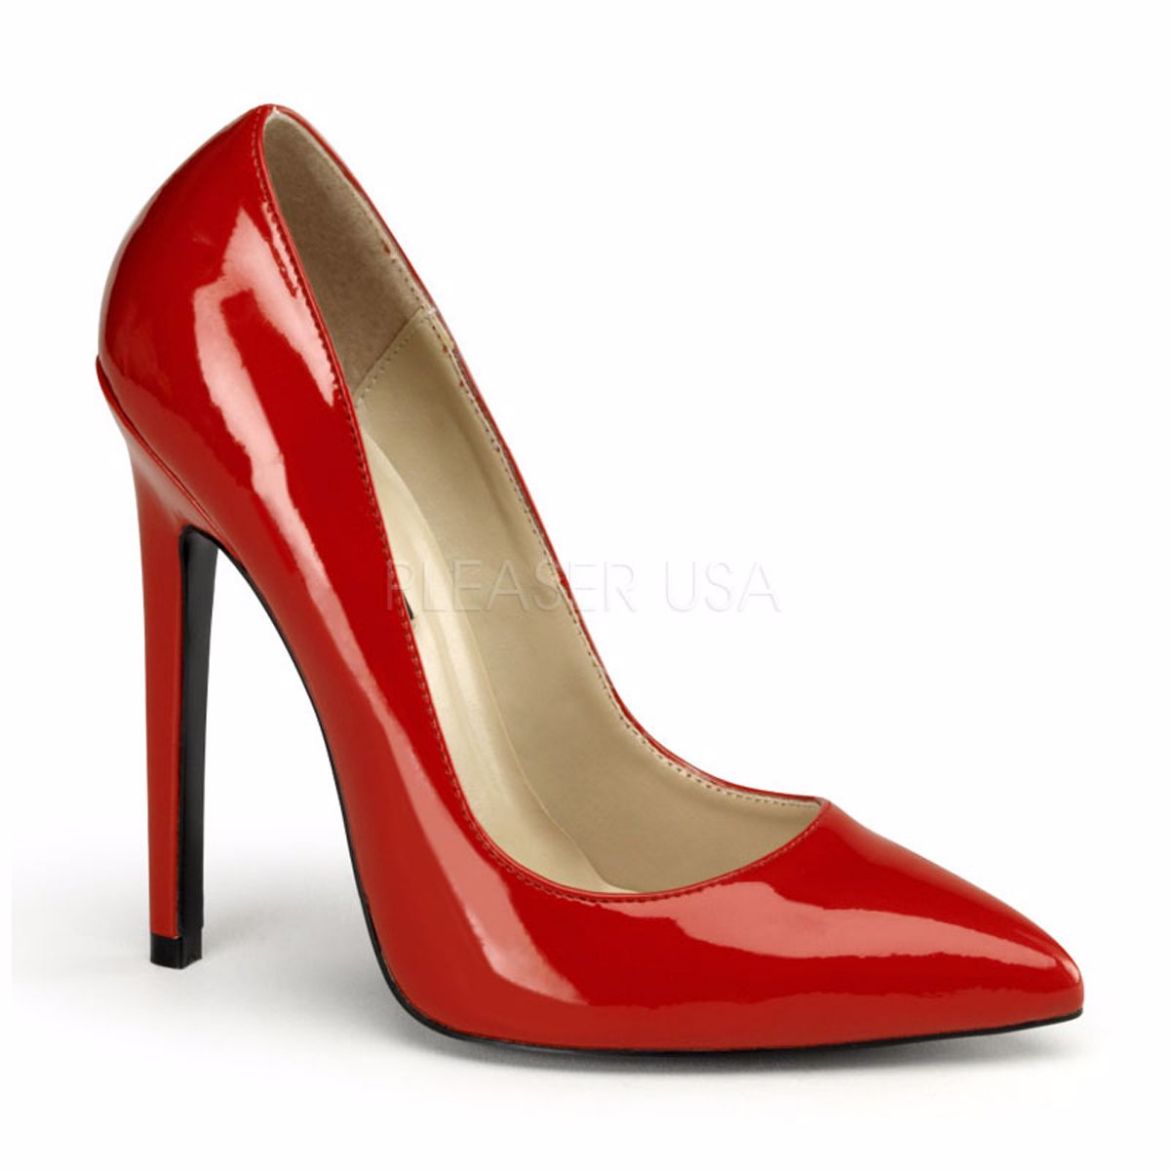 Product image of Pleaser Sexy-20 Red Patent, 5 inch (12.7 cm) Heel Court Pump Shoes